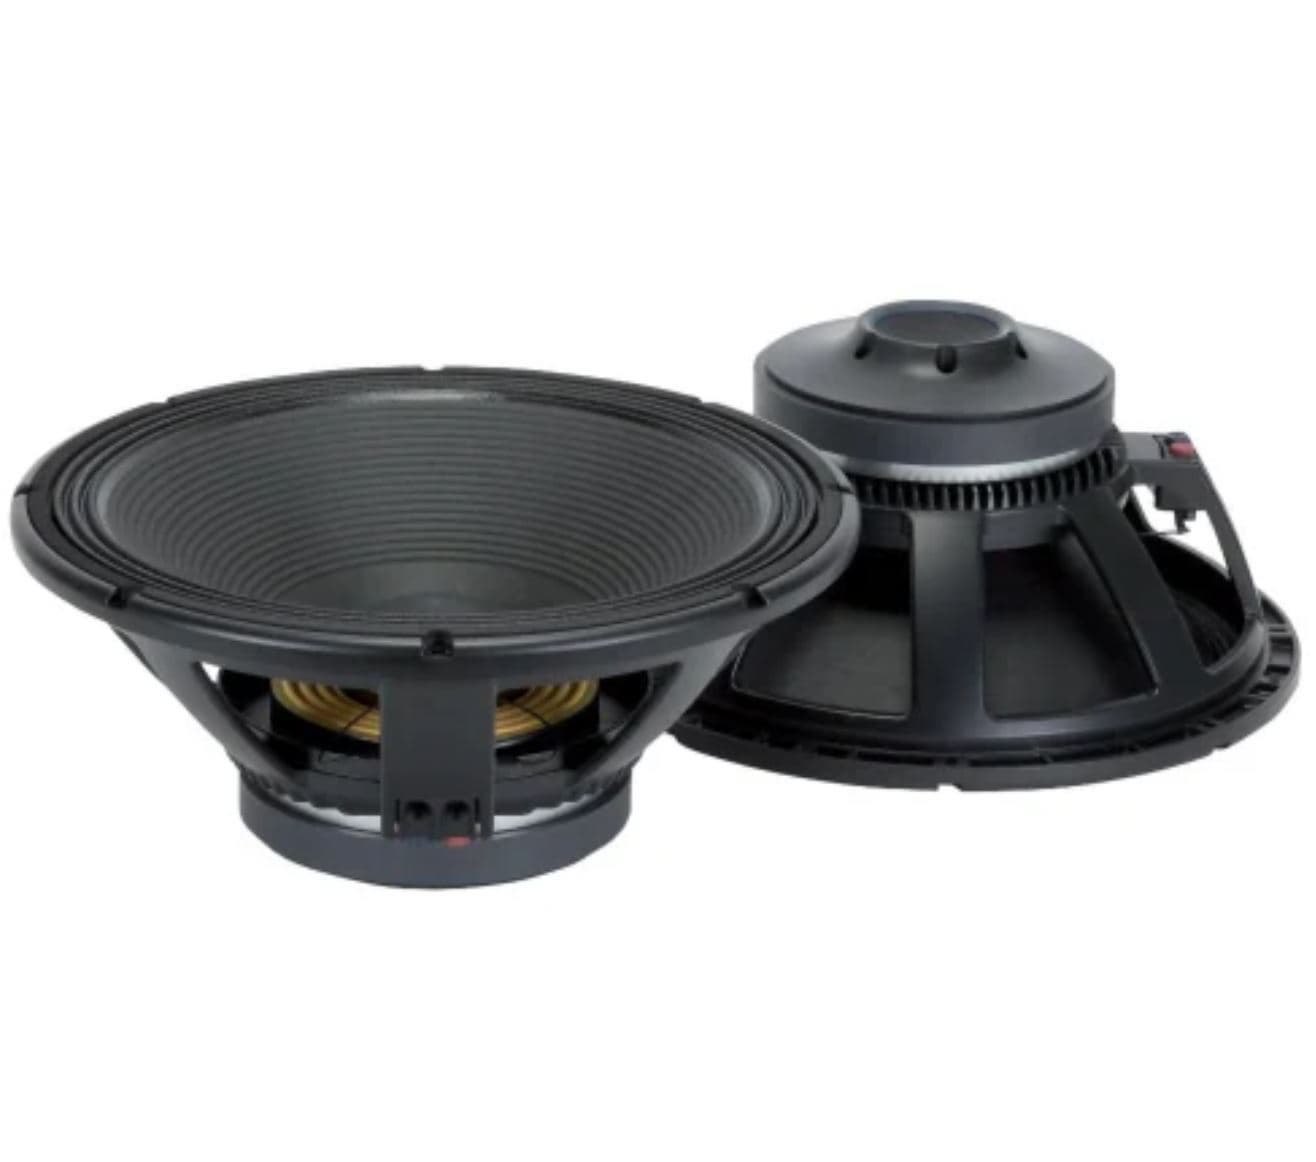 RCF L18P400 18_ 2000W Sub_Woofer For Professional bass reflex _ bass_horn system